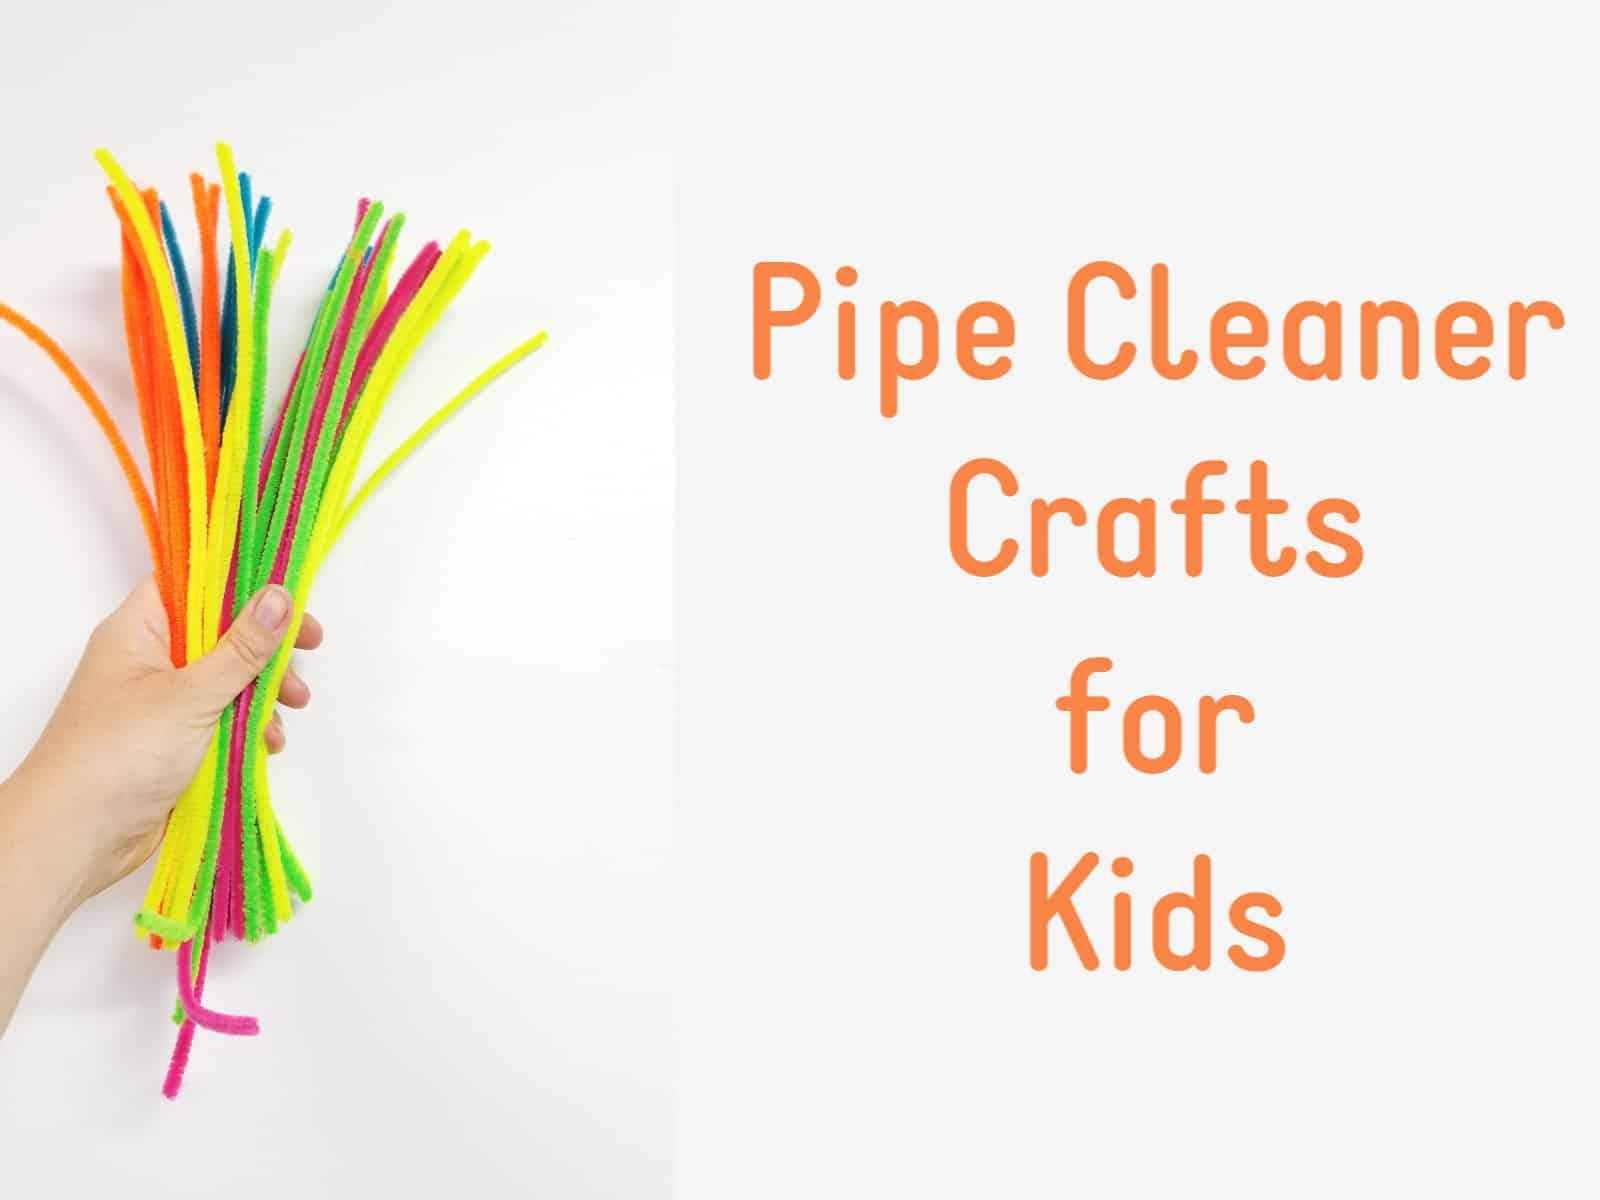 Pipe Cleaners, Pipe Cleaners Craft, Arts And Crafts For Kids